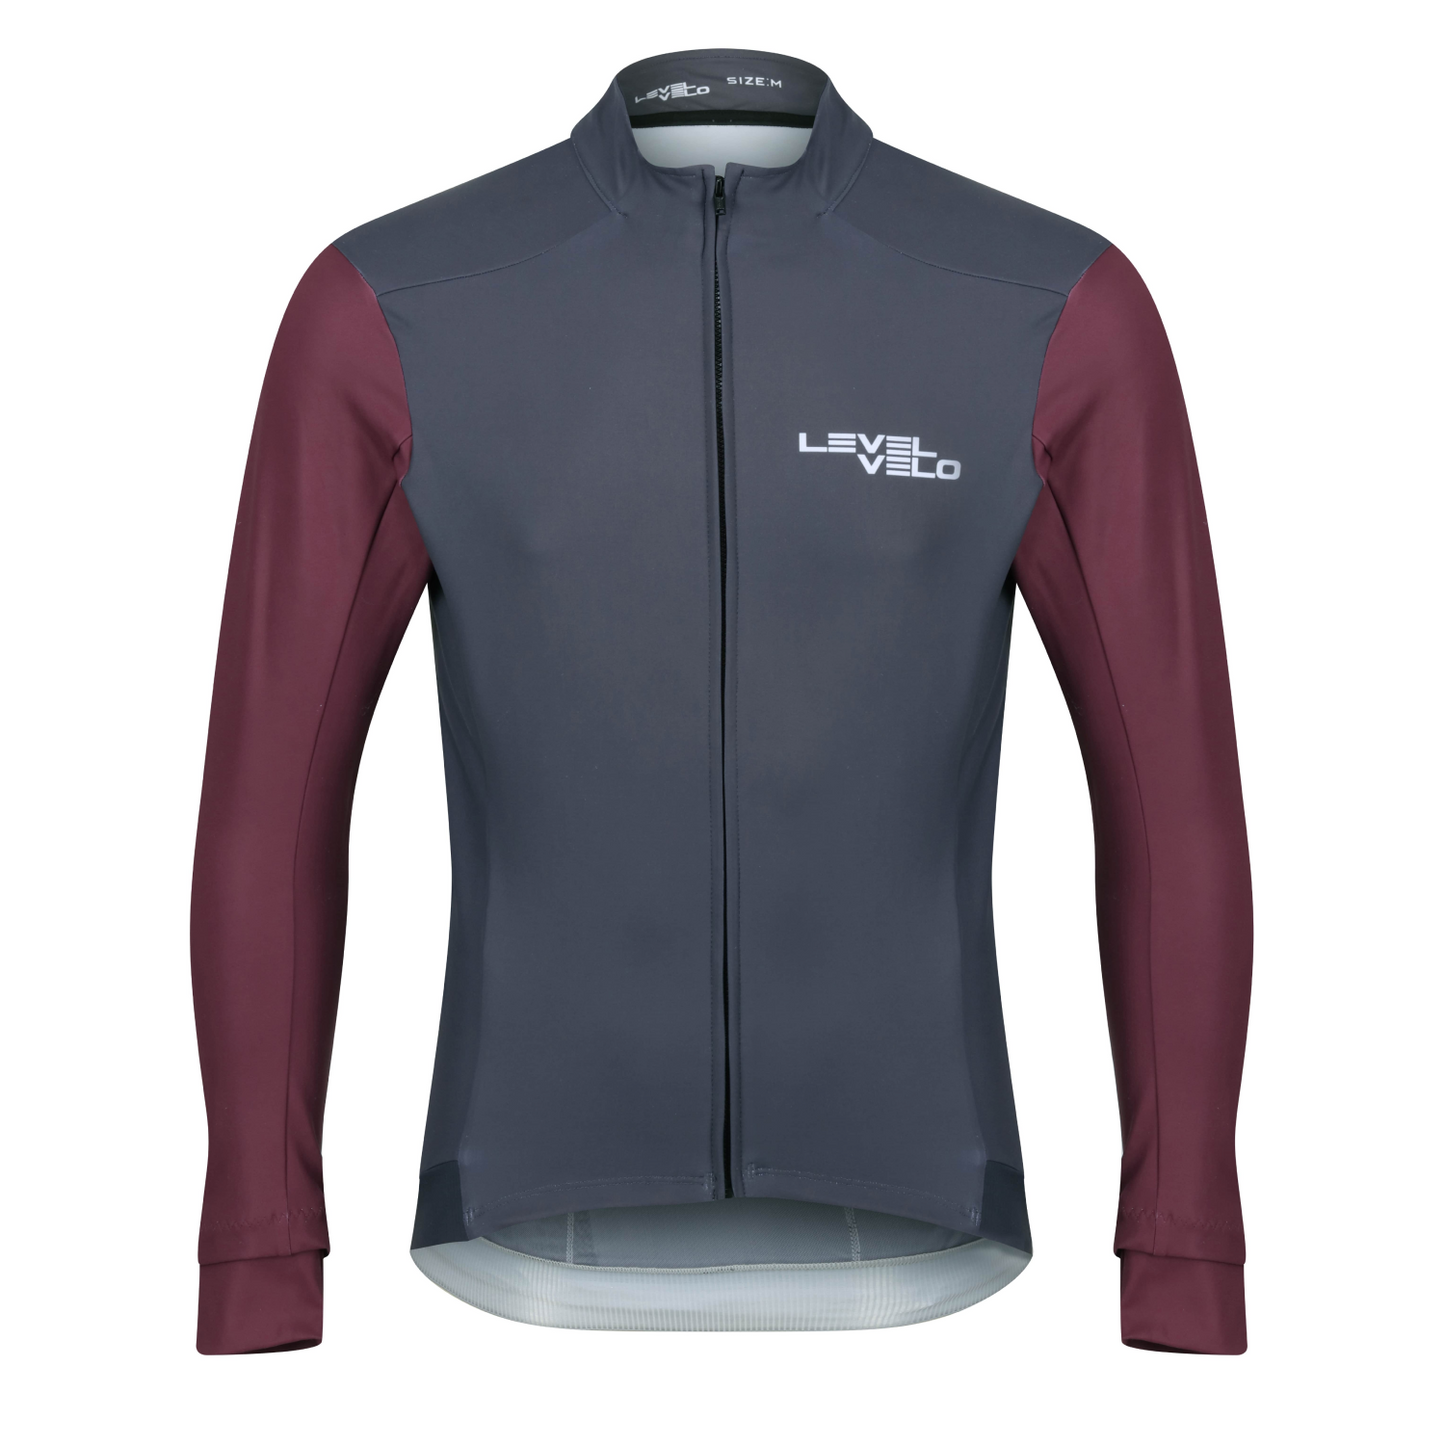 LEVEL Velo Thermal Jersey Men's fit